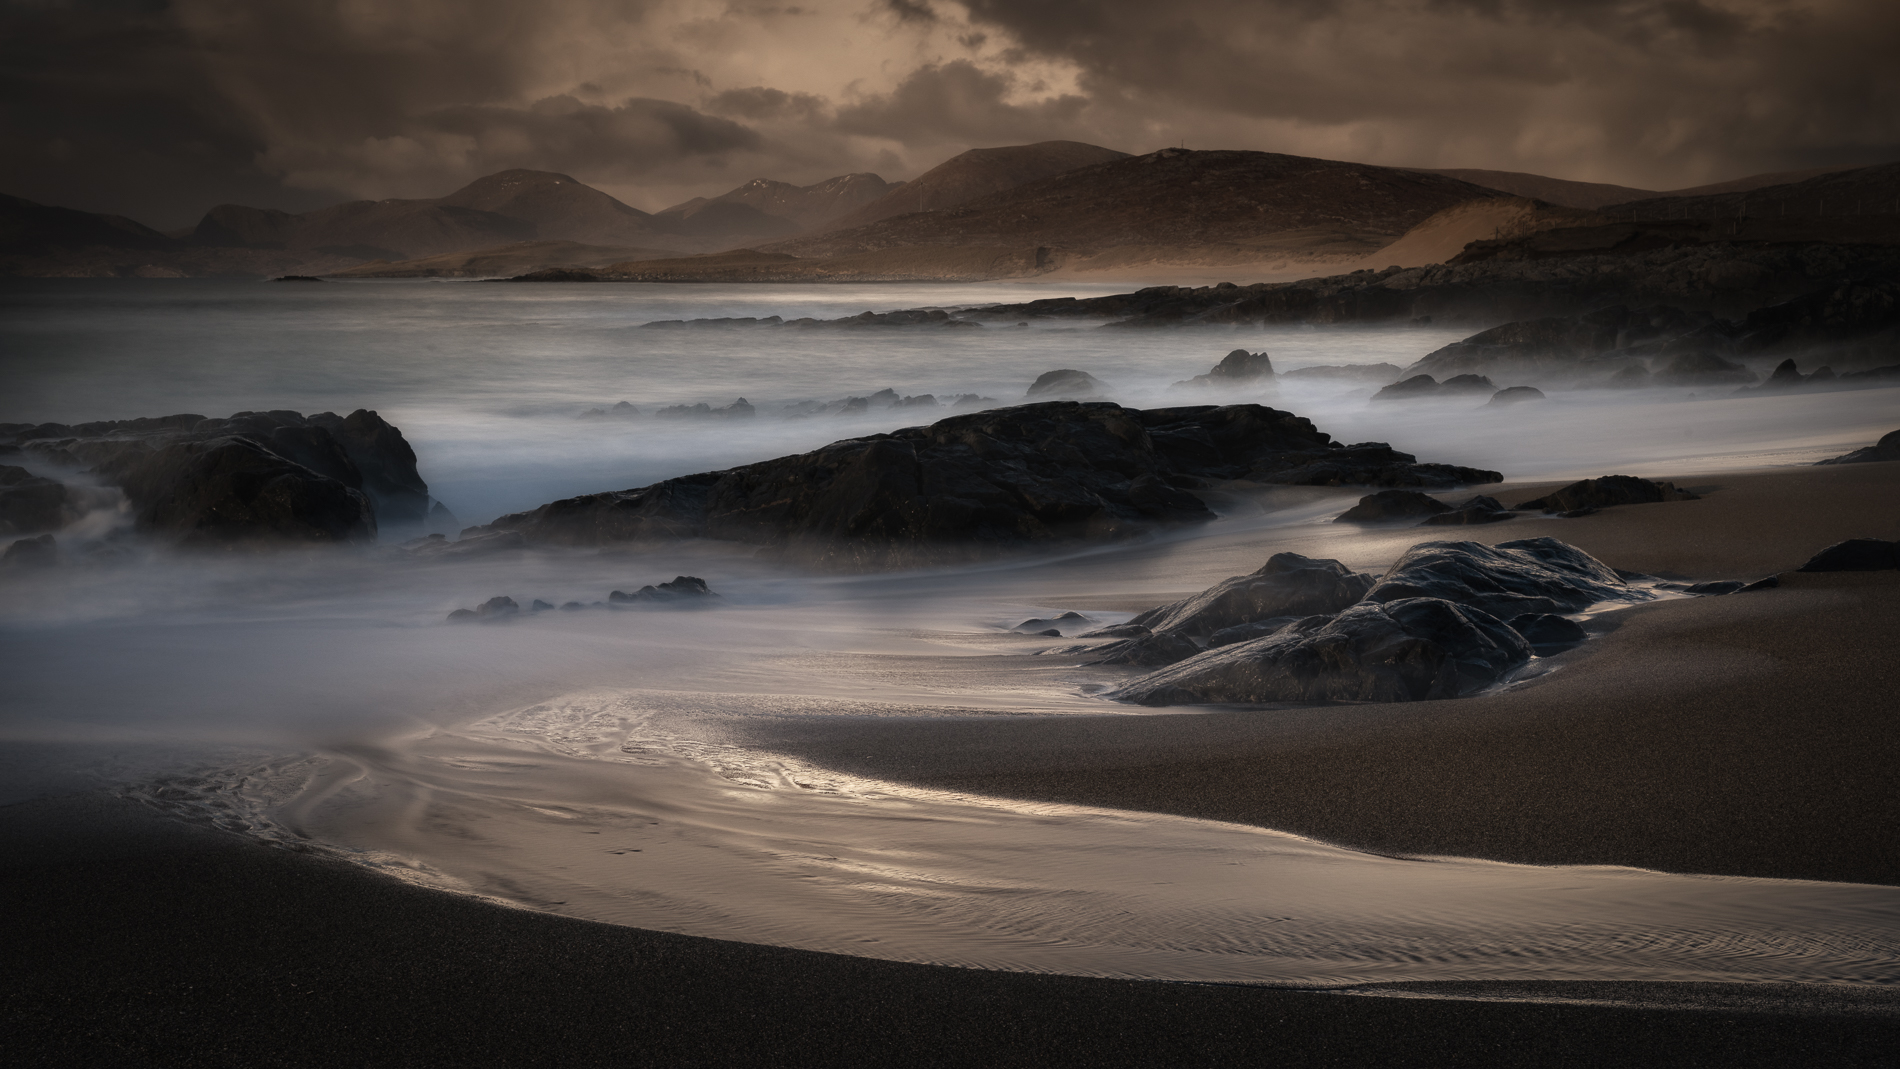 Expressive and intimate seascape photography on the Outer Hebrides, Scotland